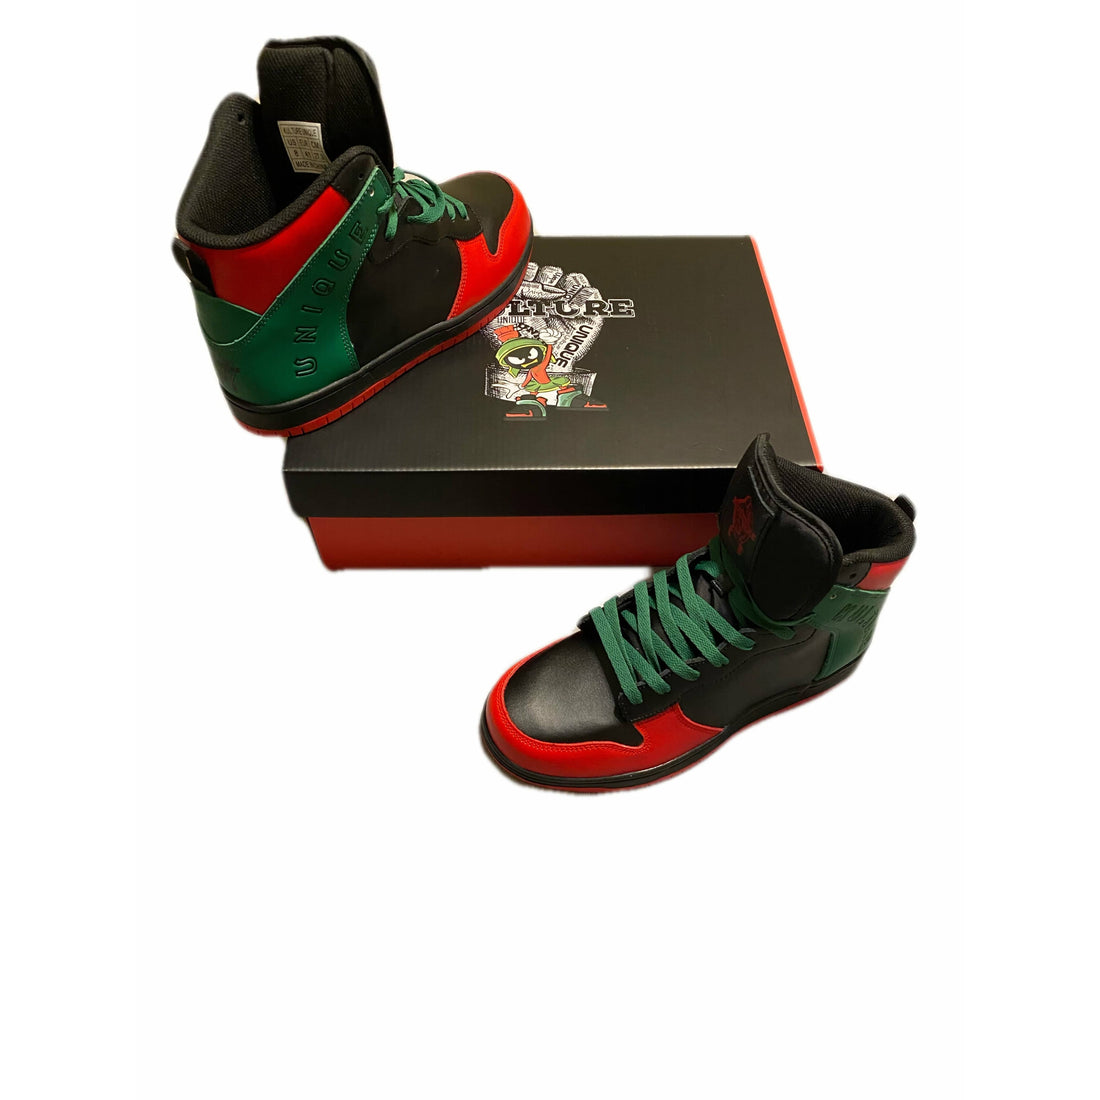 martians unique kulture limited edition red black green sneakers mid top l leather  pattern  designer shoes marvin the martian 